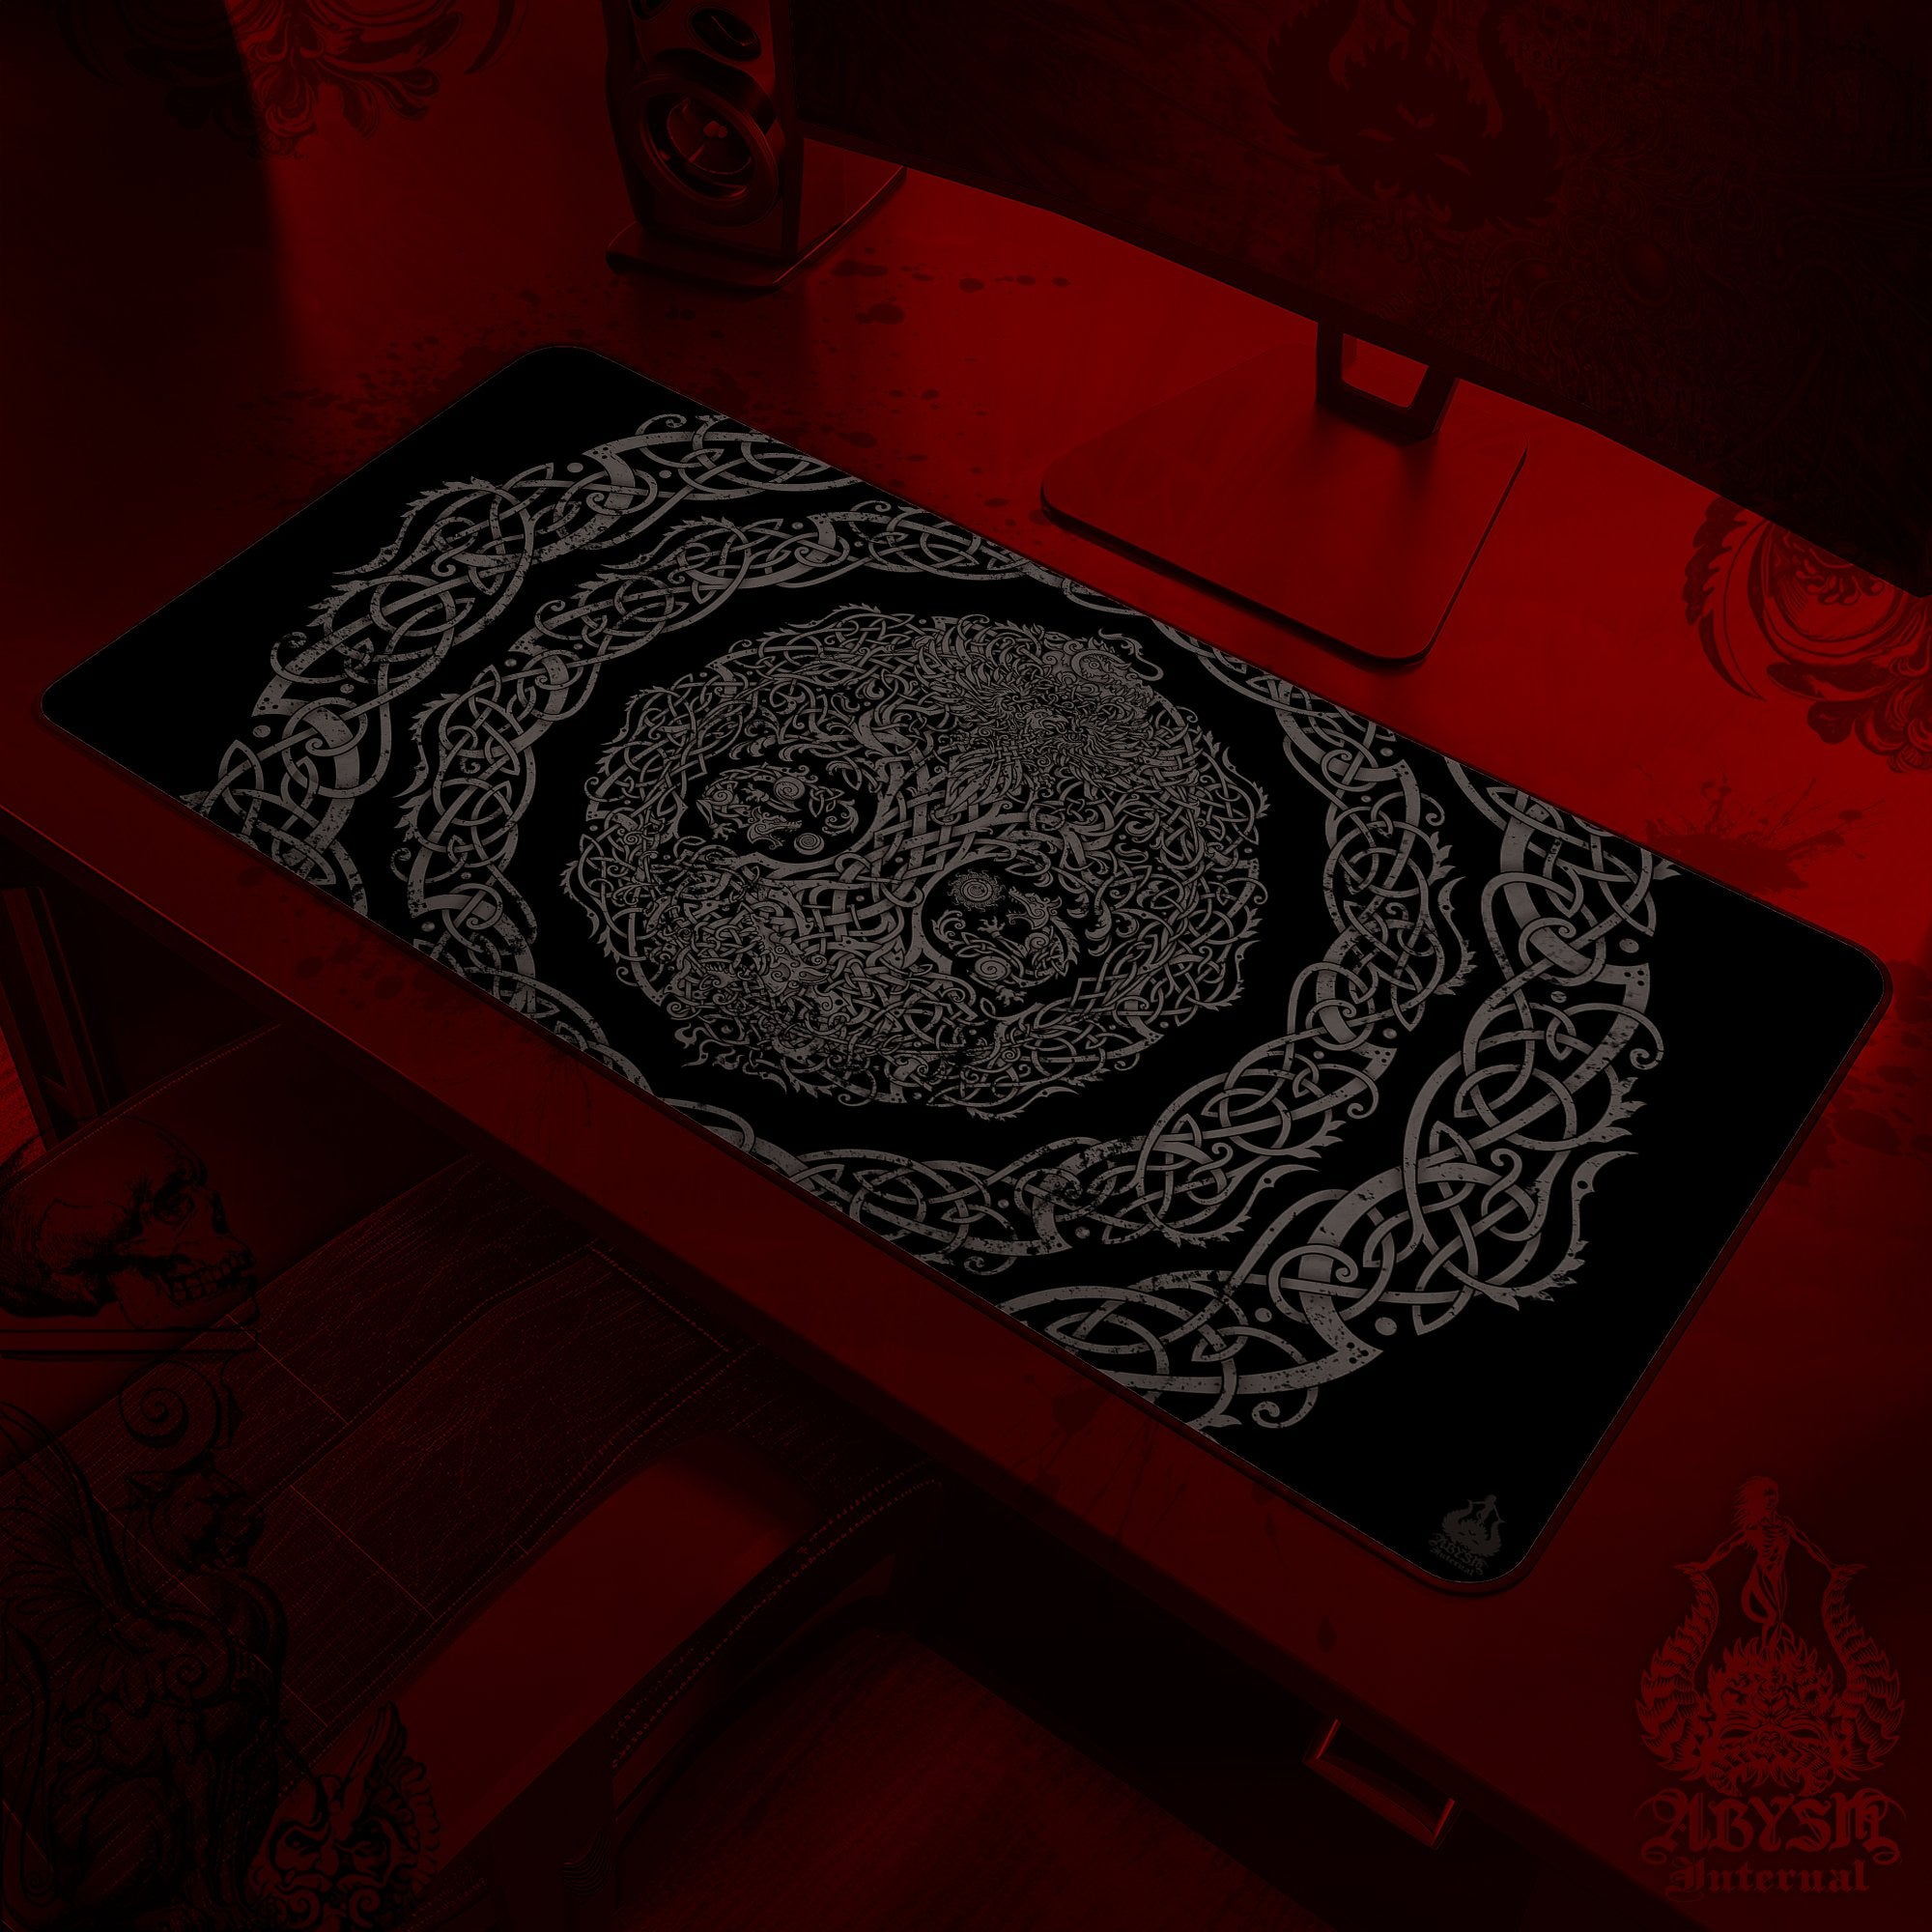 Yggdrasil Gaming Mouse Pad, Nordic Tree of Life Desk Mat, Norse Table Protector Cover, Knotwork Workpad, Viking Art Print - Black Grey Grit - Abysm Internal